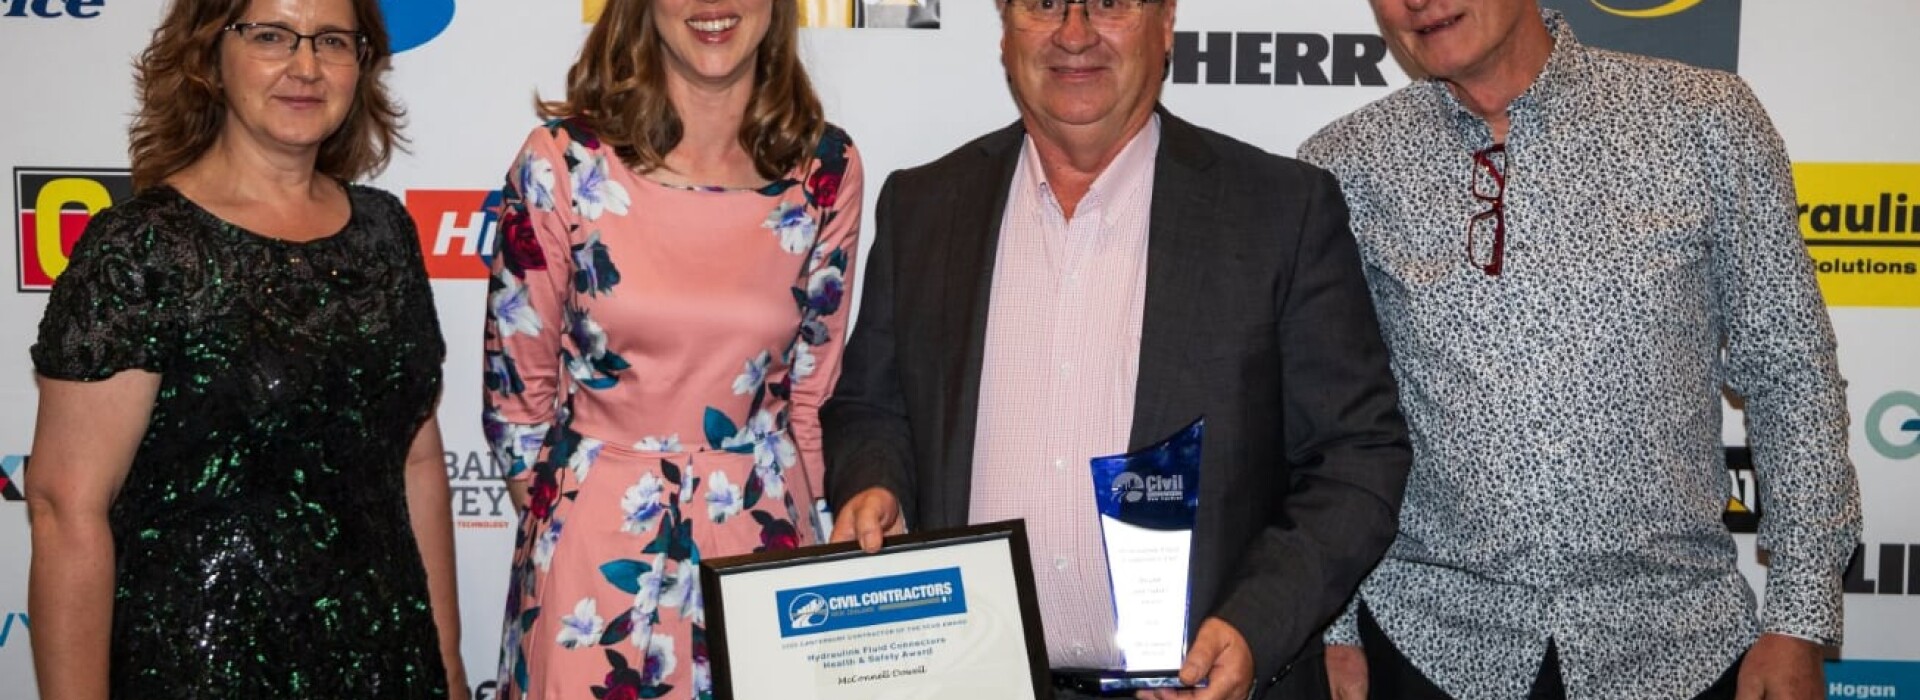 Lyttelton Tunnel Deluge project winners at CCNZ Awards